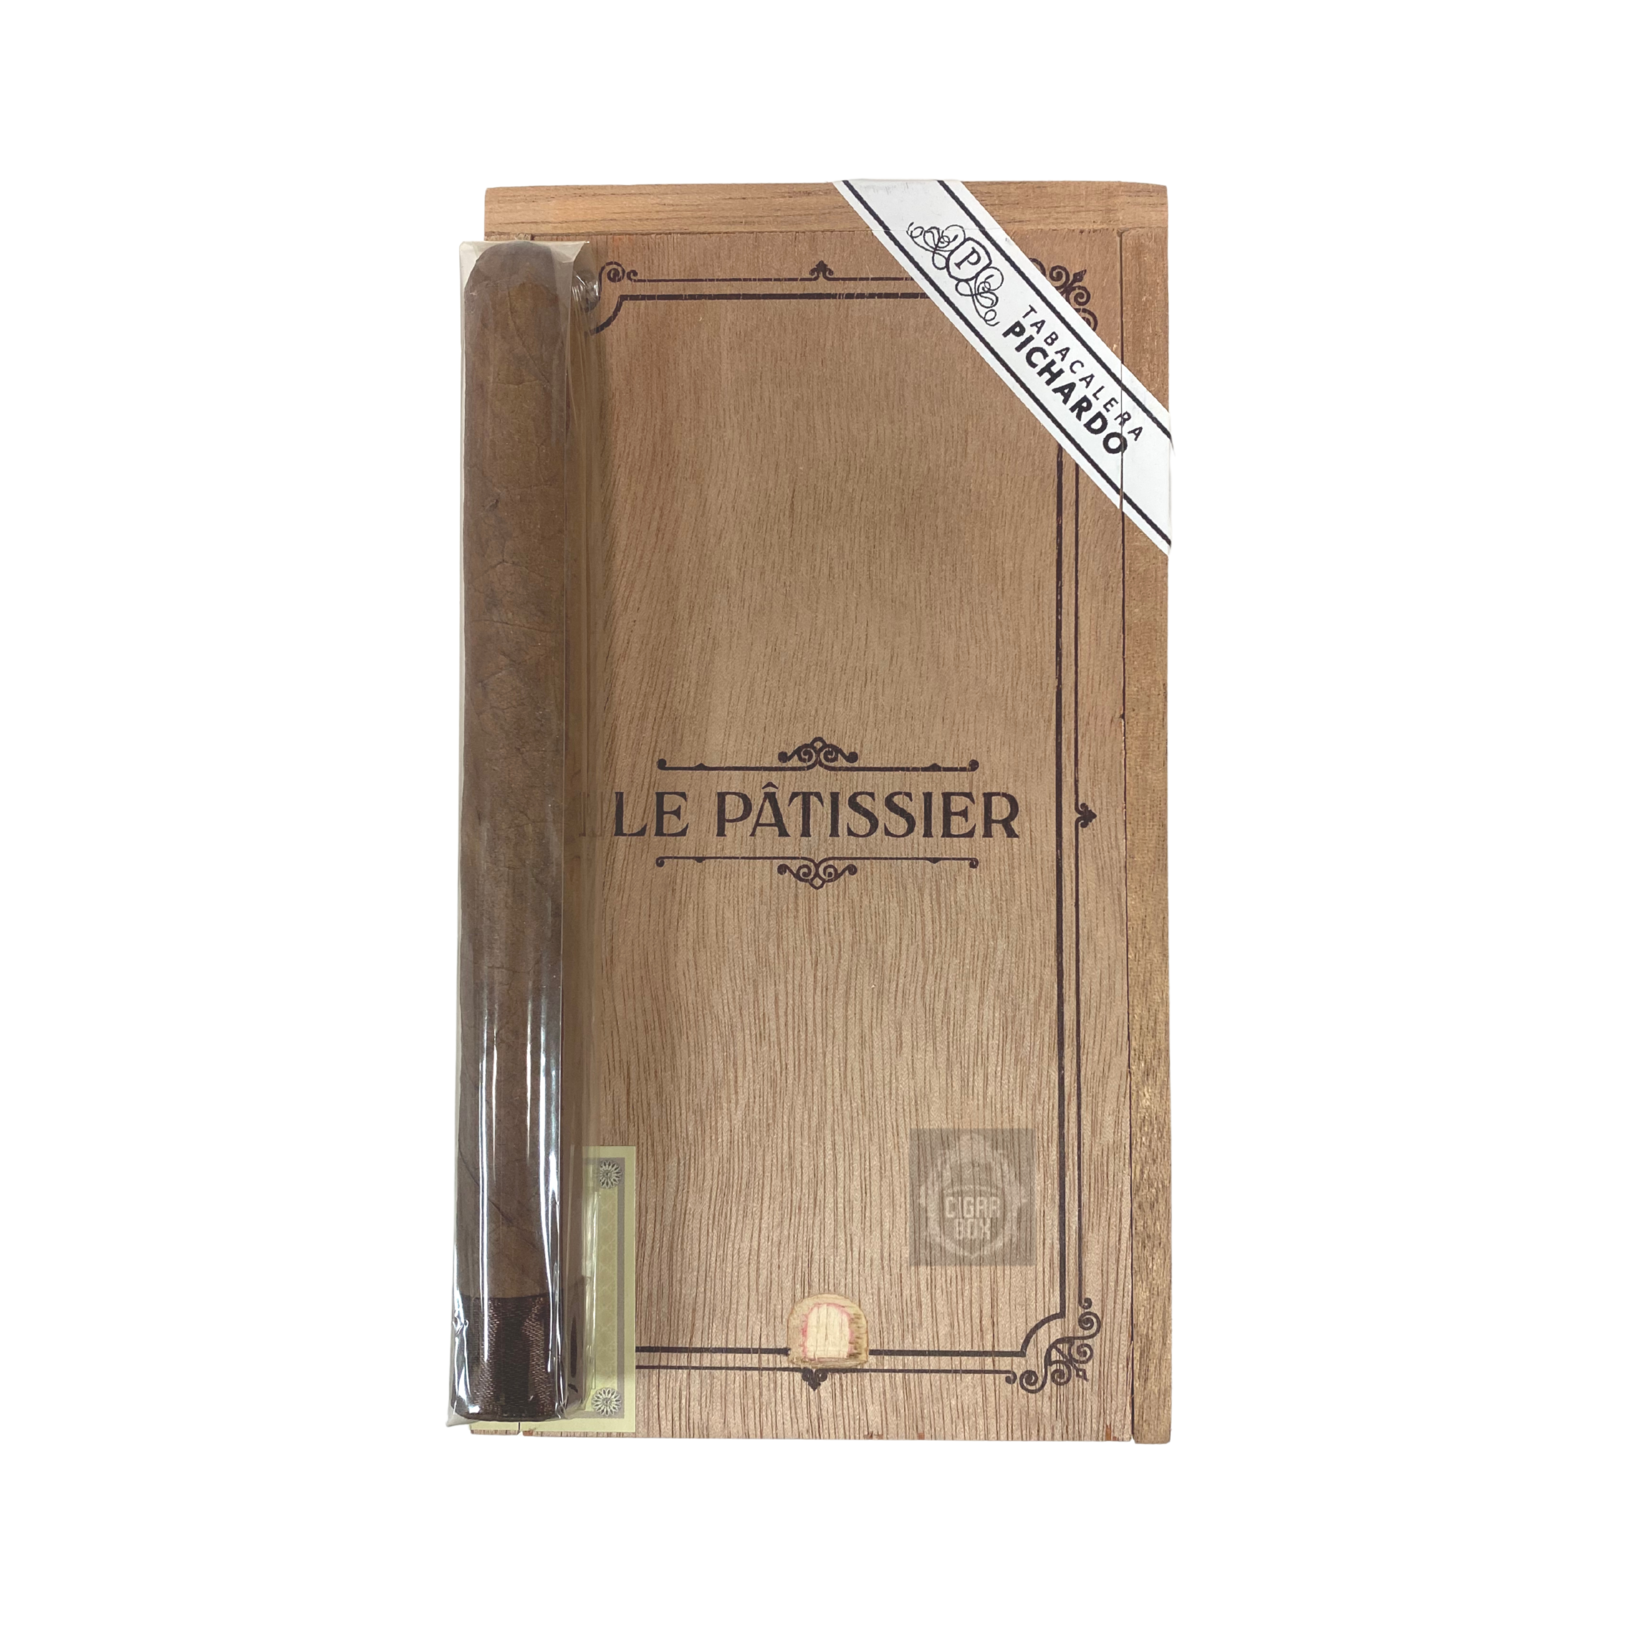 Crowned Heads Le Patissier PCA Exclusive 6.5 x 44 Box